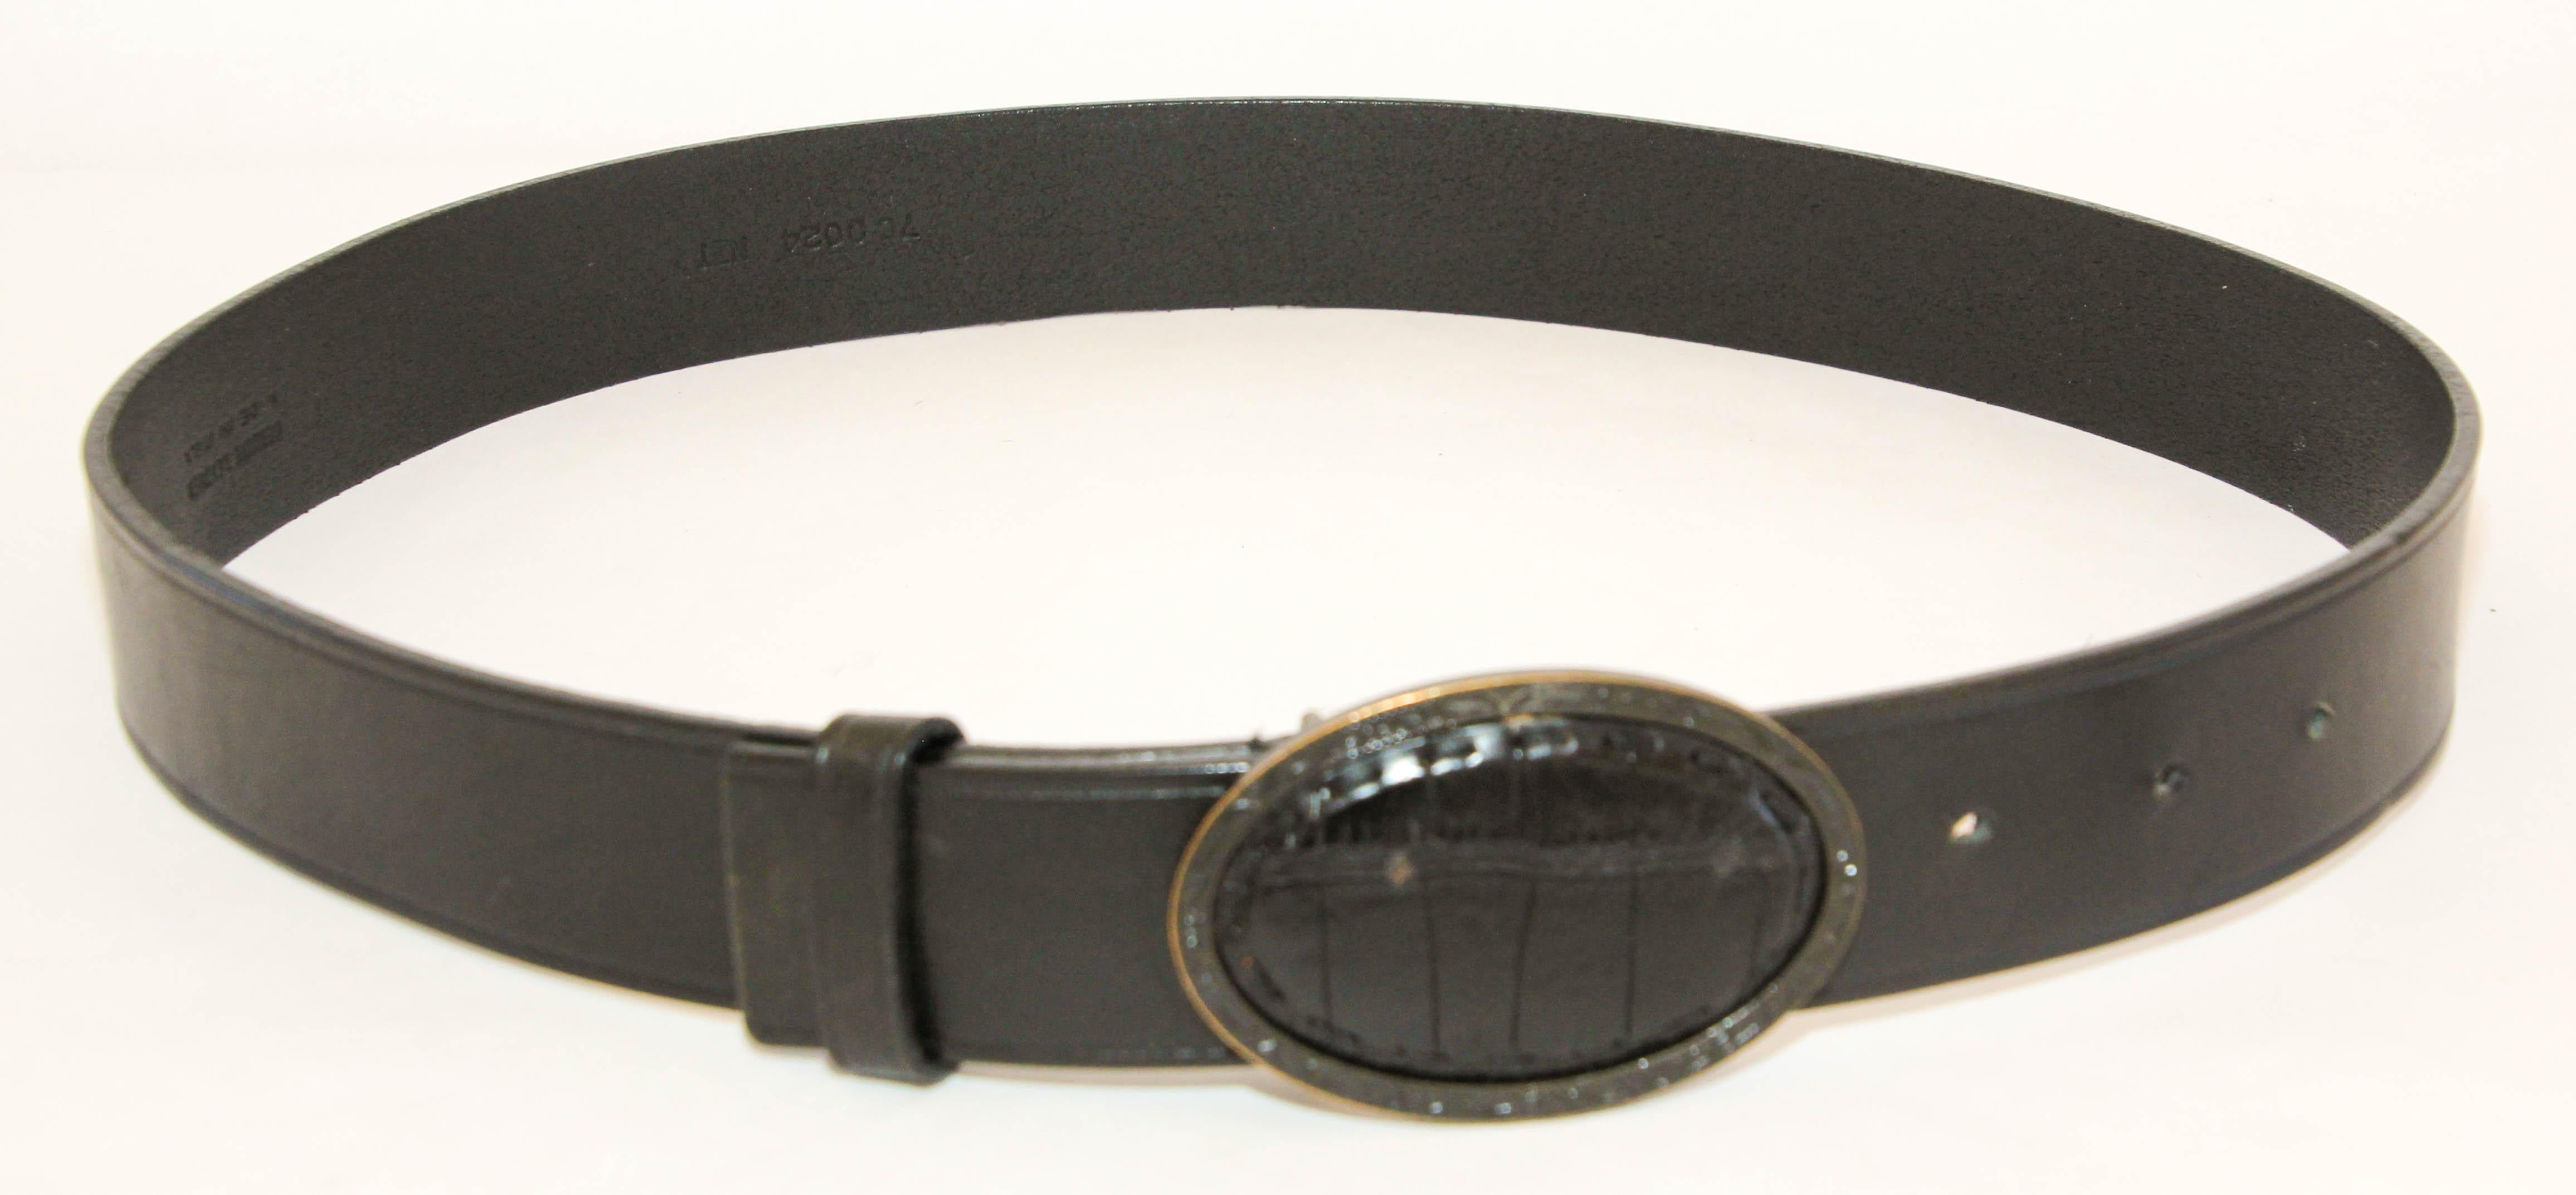 FENDI Black Leather Crocodile Cowboy Belt.
Oval shape belt buckle in antiqued brass with crocodile leather inset .
Dress up or dress down, this belt can be worn for any occasion. 
The oval shape buckle is 3.5